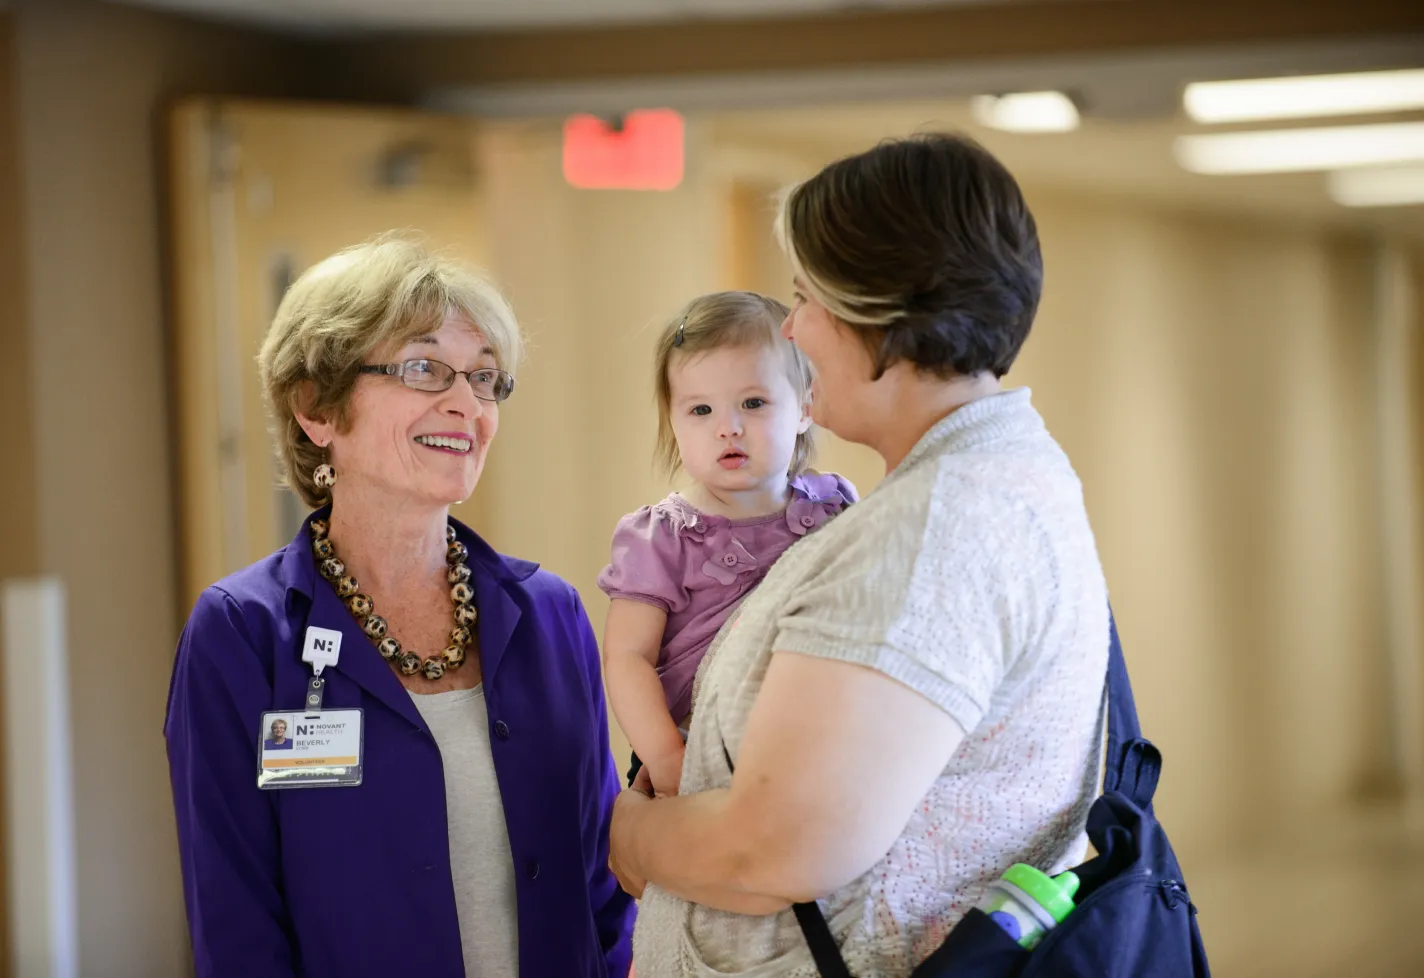 Novant Health volunteer meets with mother and child in pediatric hospital hallway